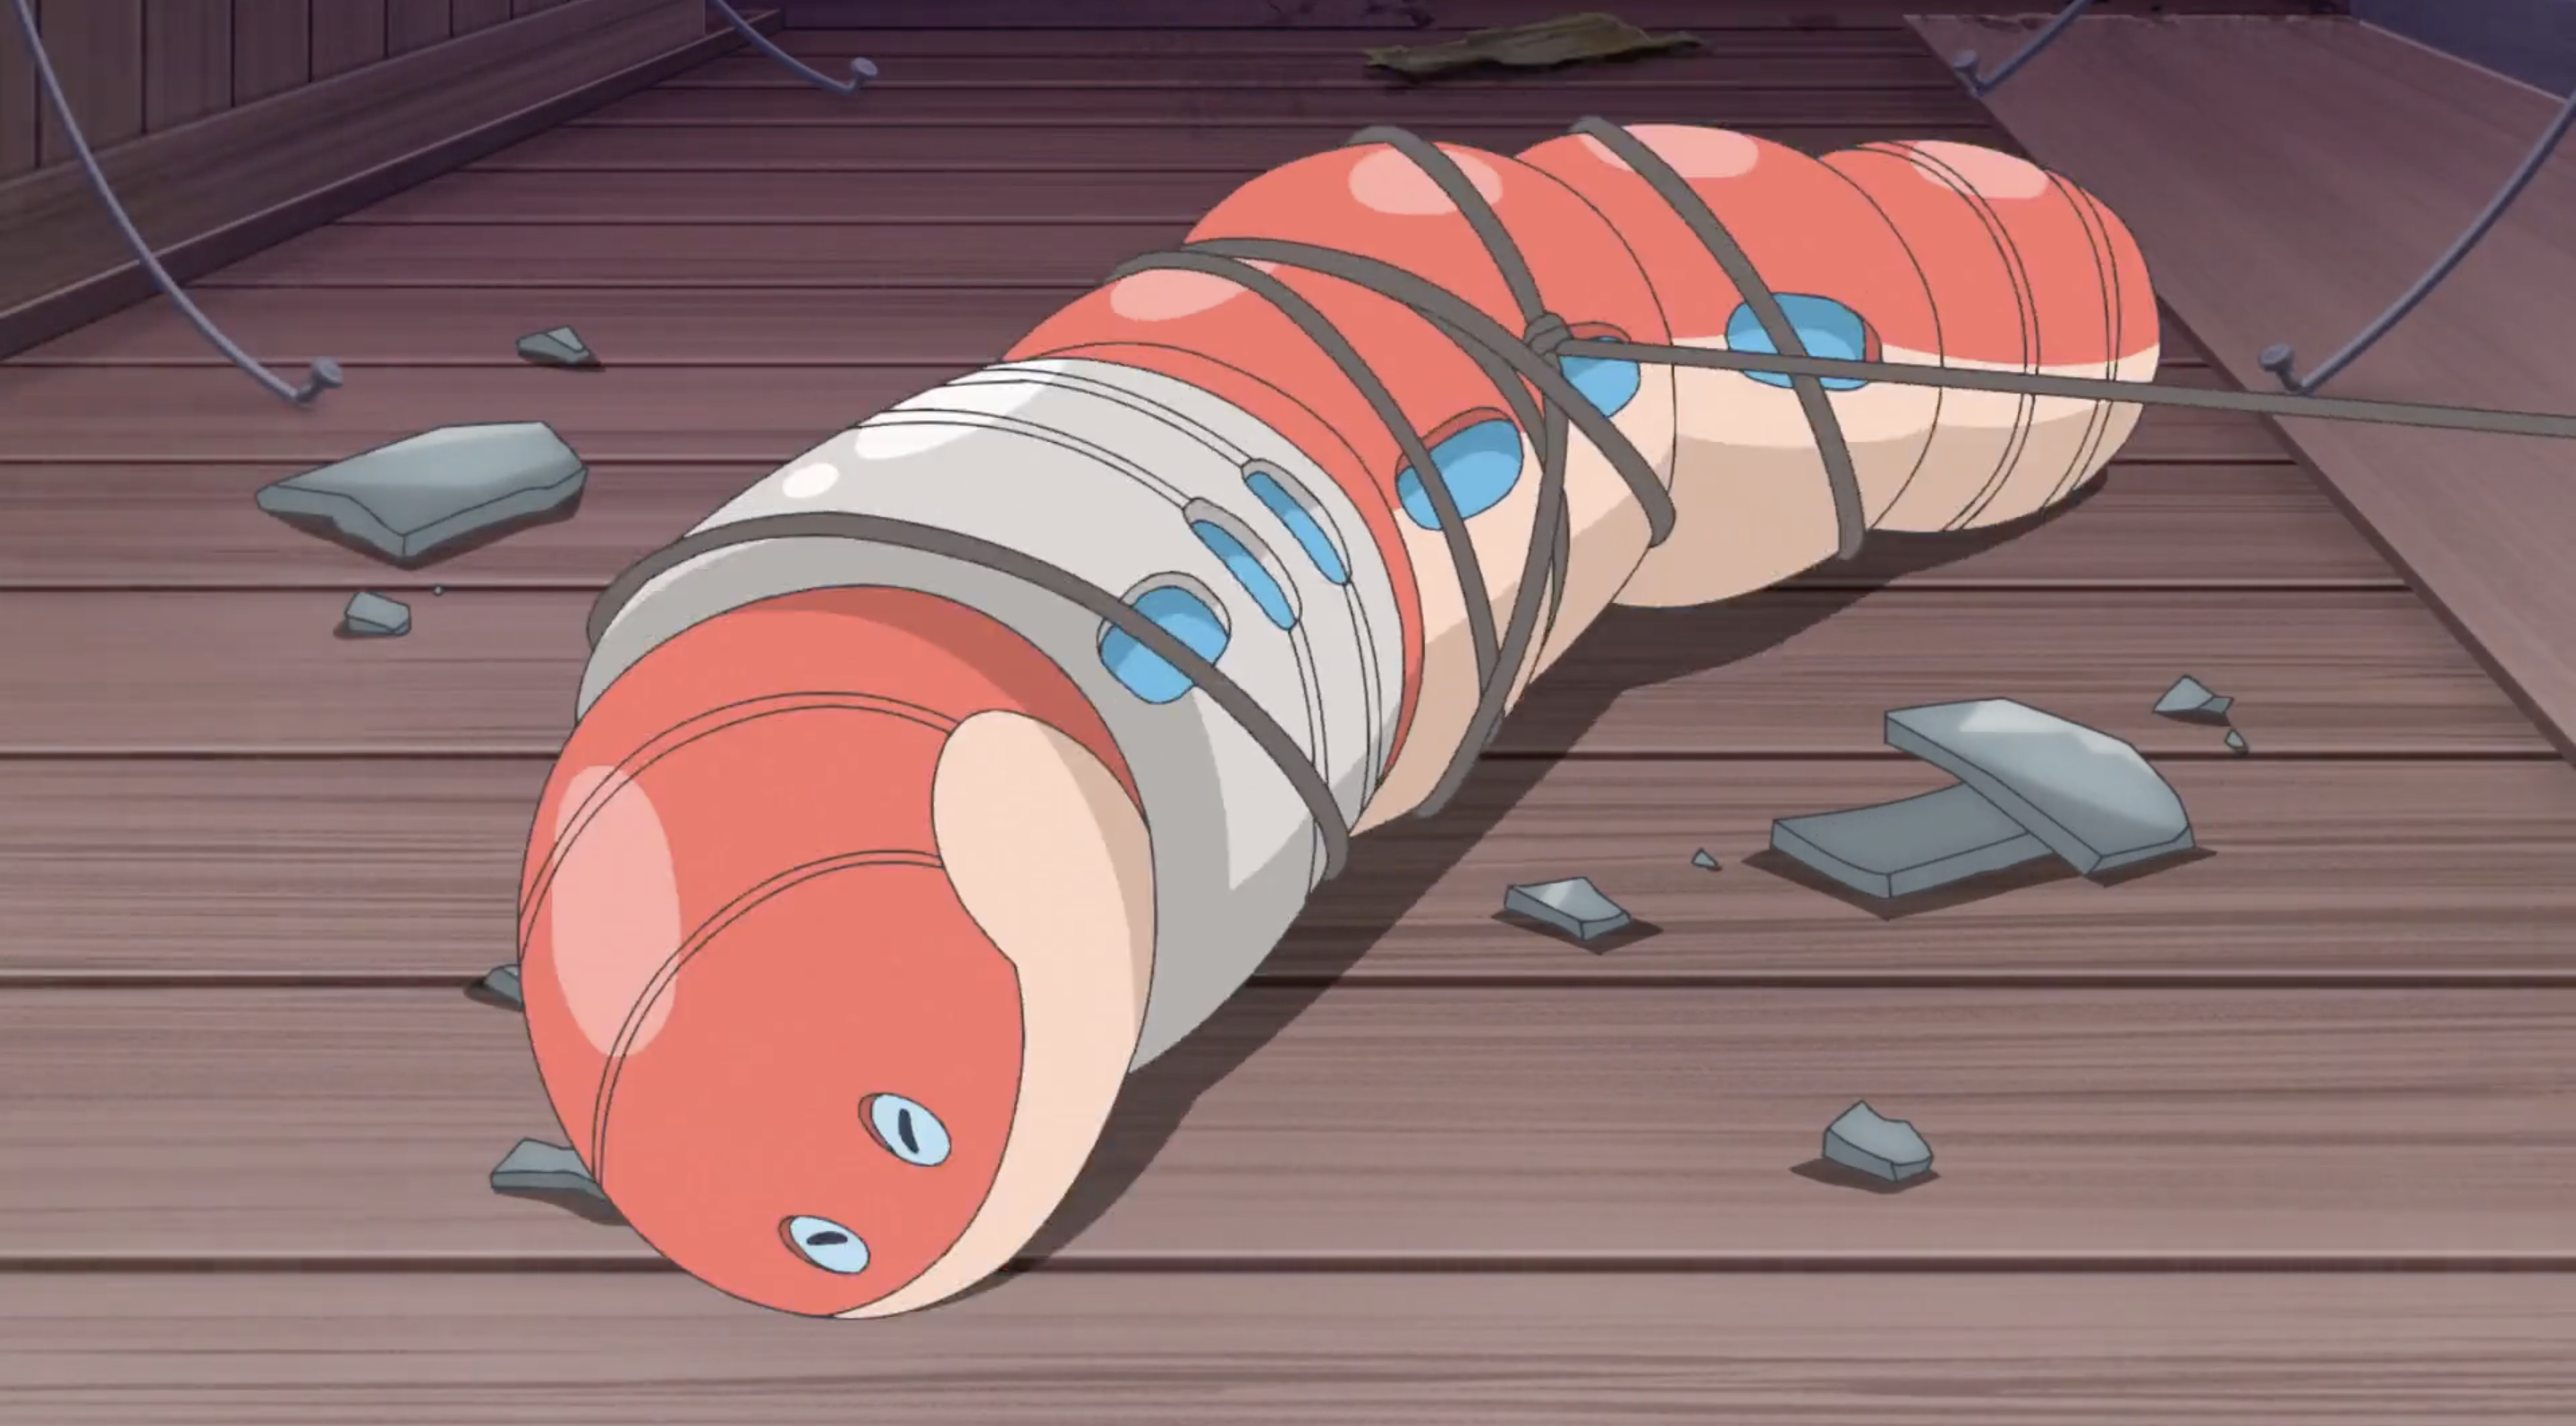 Orthworm all tied up